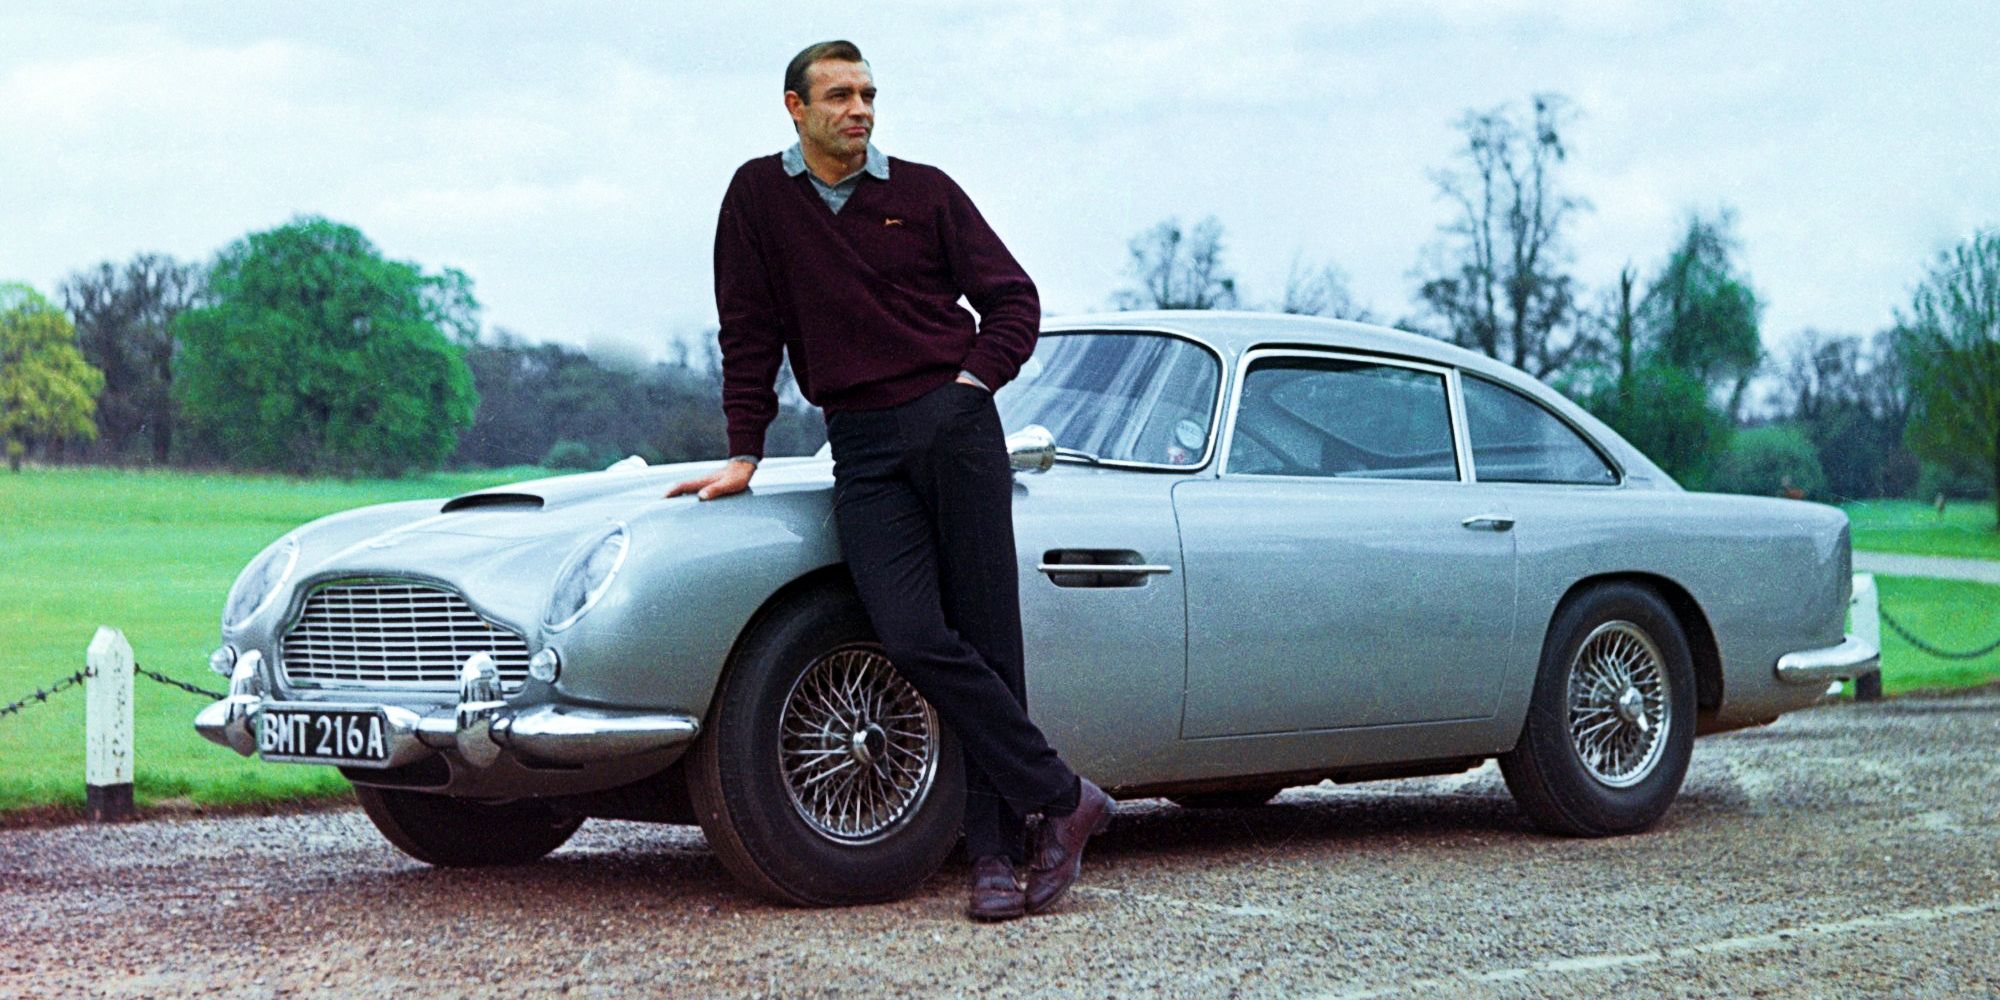 Sean Connery’s Personal James Bond Car Up For Auction At Over $1.5M